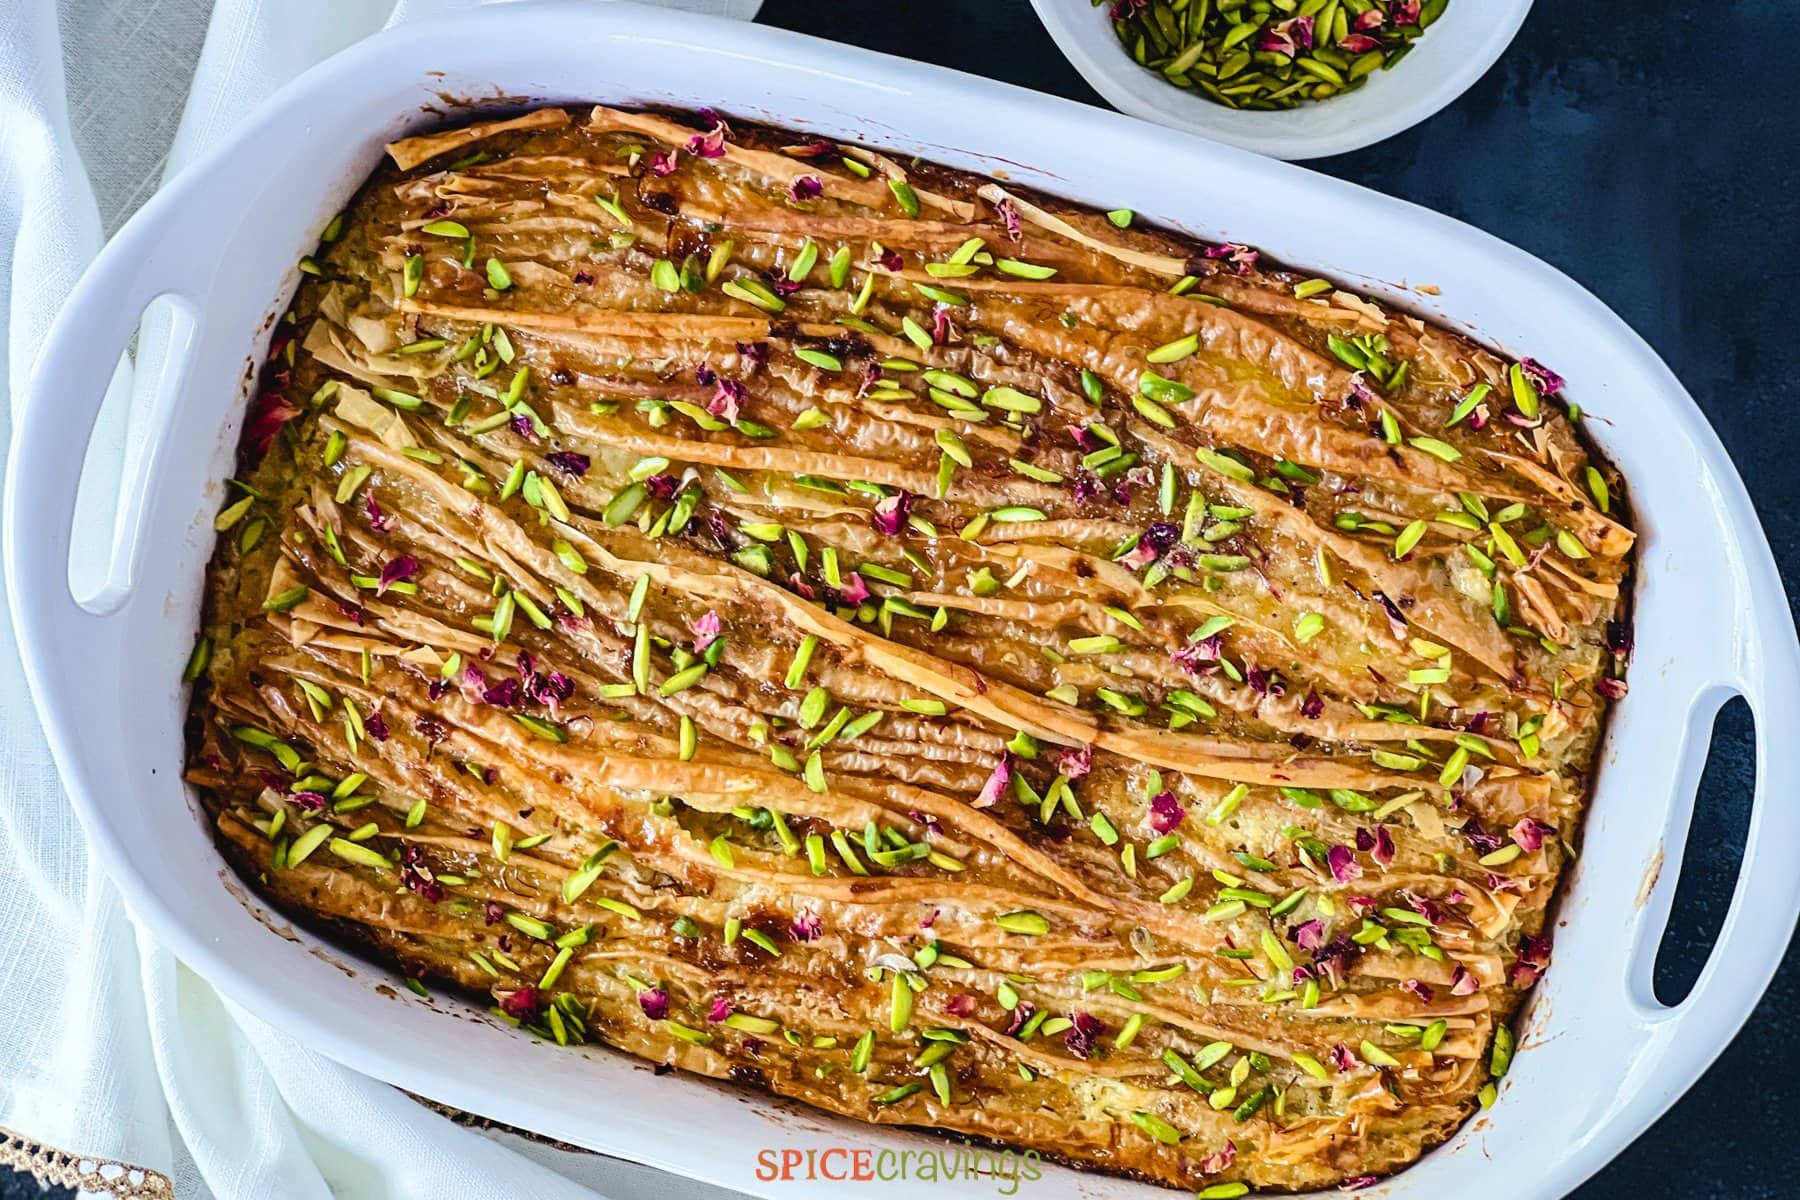 Baked crinkle cake topped with pistachios and rose petals